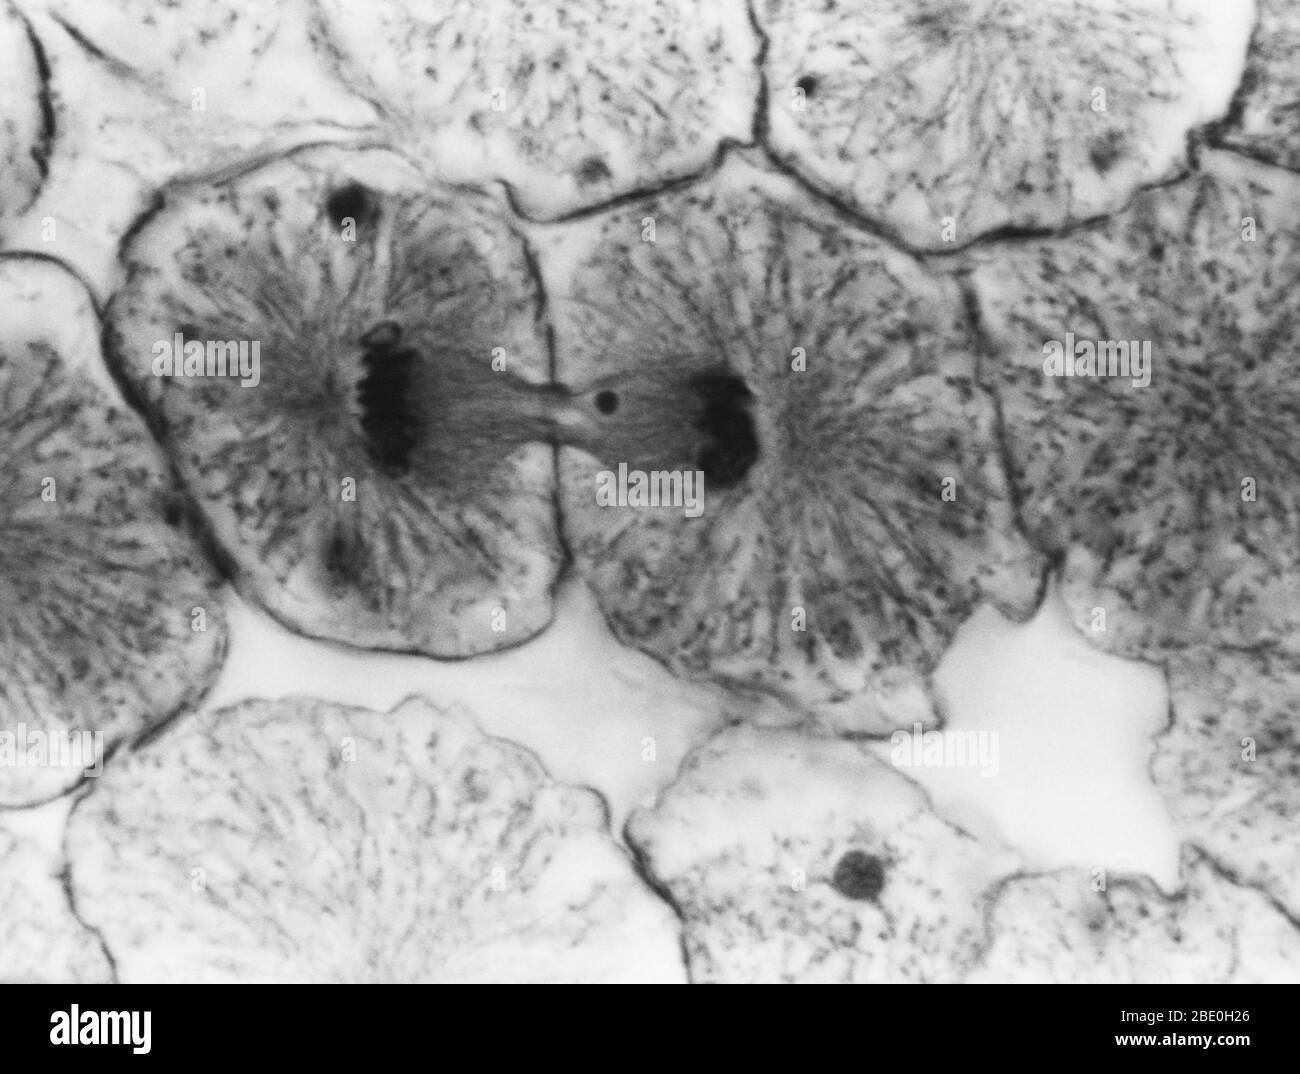 Light micrograph showing mitosis in whitefish blastula, telophase.  No magnification given. Mitosis, the usual method of cell division, characterized typically by the resolving of the chromatin of the nucleus into a threadlike form, which condenses into chromosomes, each of which separates longitudinally into two parts, one part of each chromosome being retained in each of two new cells resulting from the original cell. The four main phases of mitosis are prophase, metaphase, anaphase, and telophase. Blastula, an animal embryo at the stage immediately following the division of the fertilized e Stock Photo